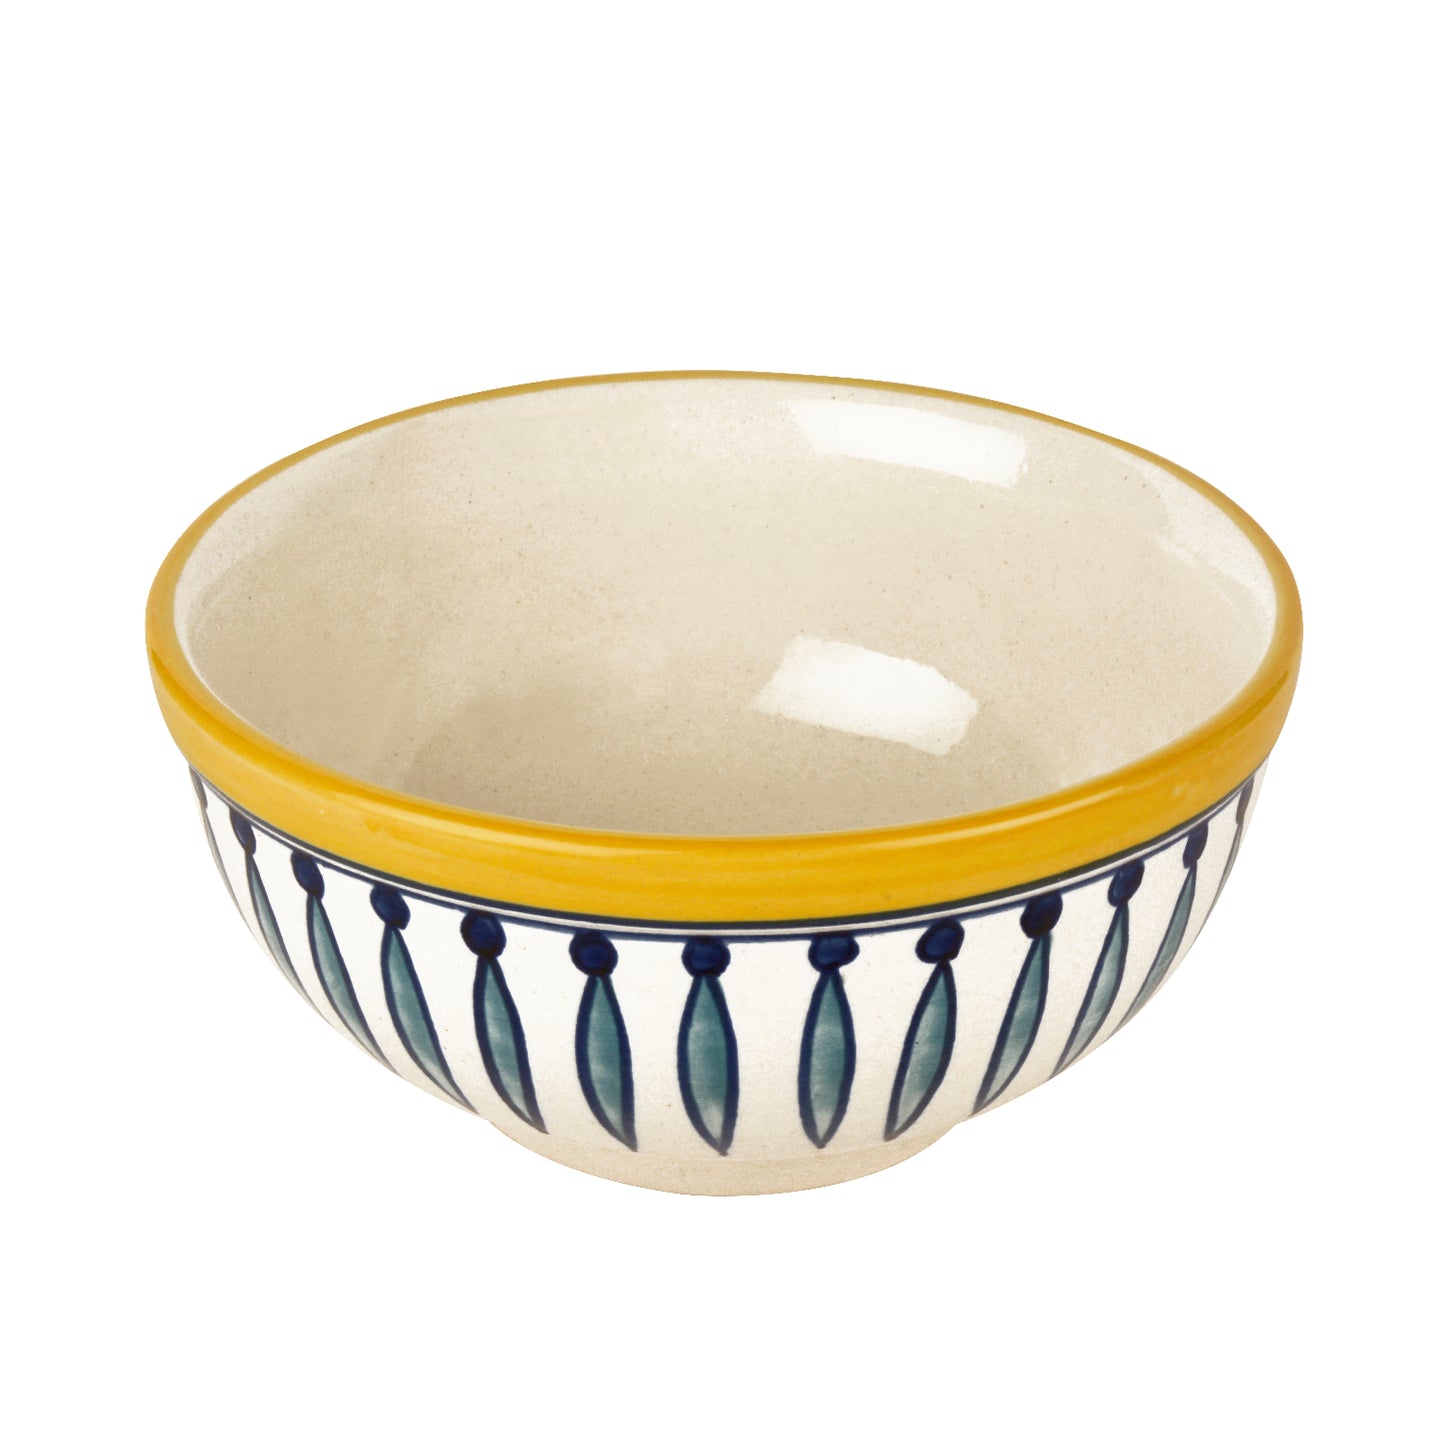 "Kyoto Collection" Handpainted Ceramic Dinner Serving Bowl (White and Blue, 1000 ml)